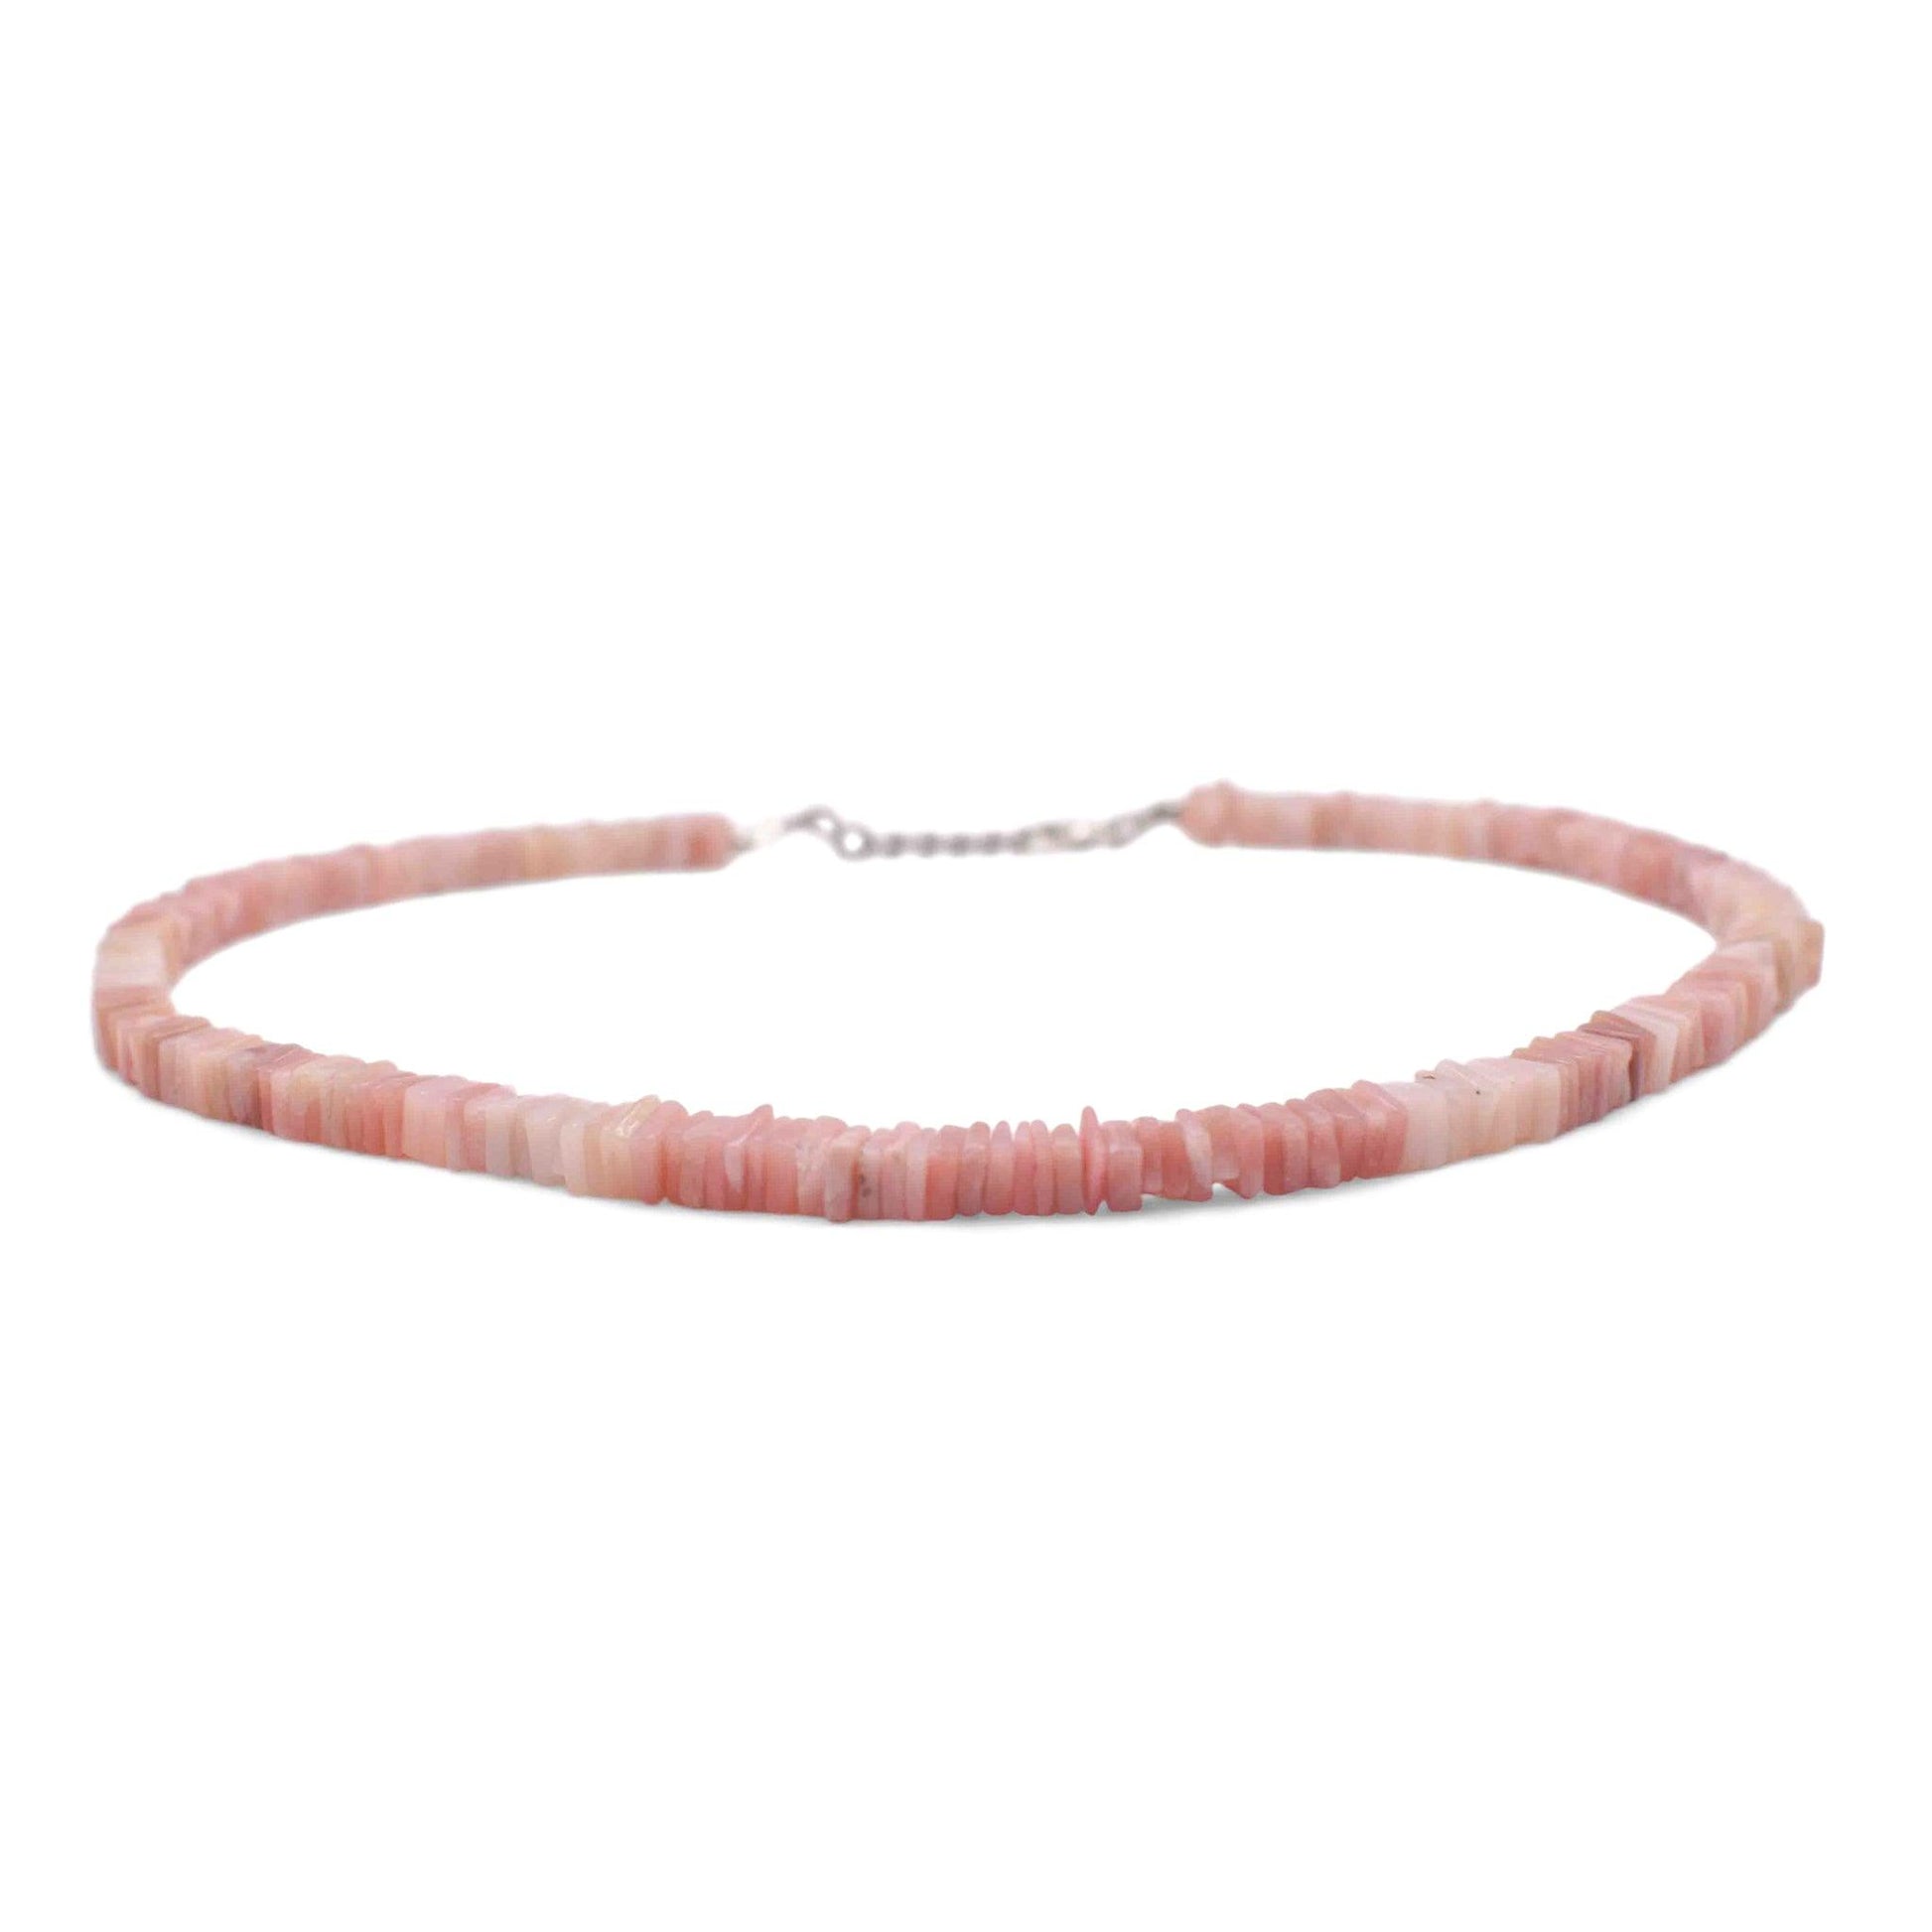 Pink opal heishi beads necklace front angle 